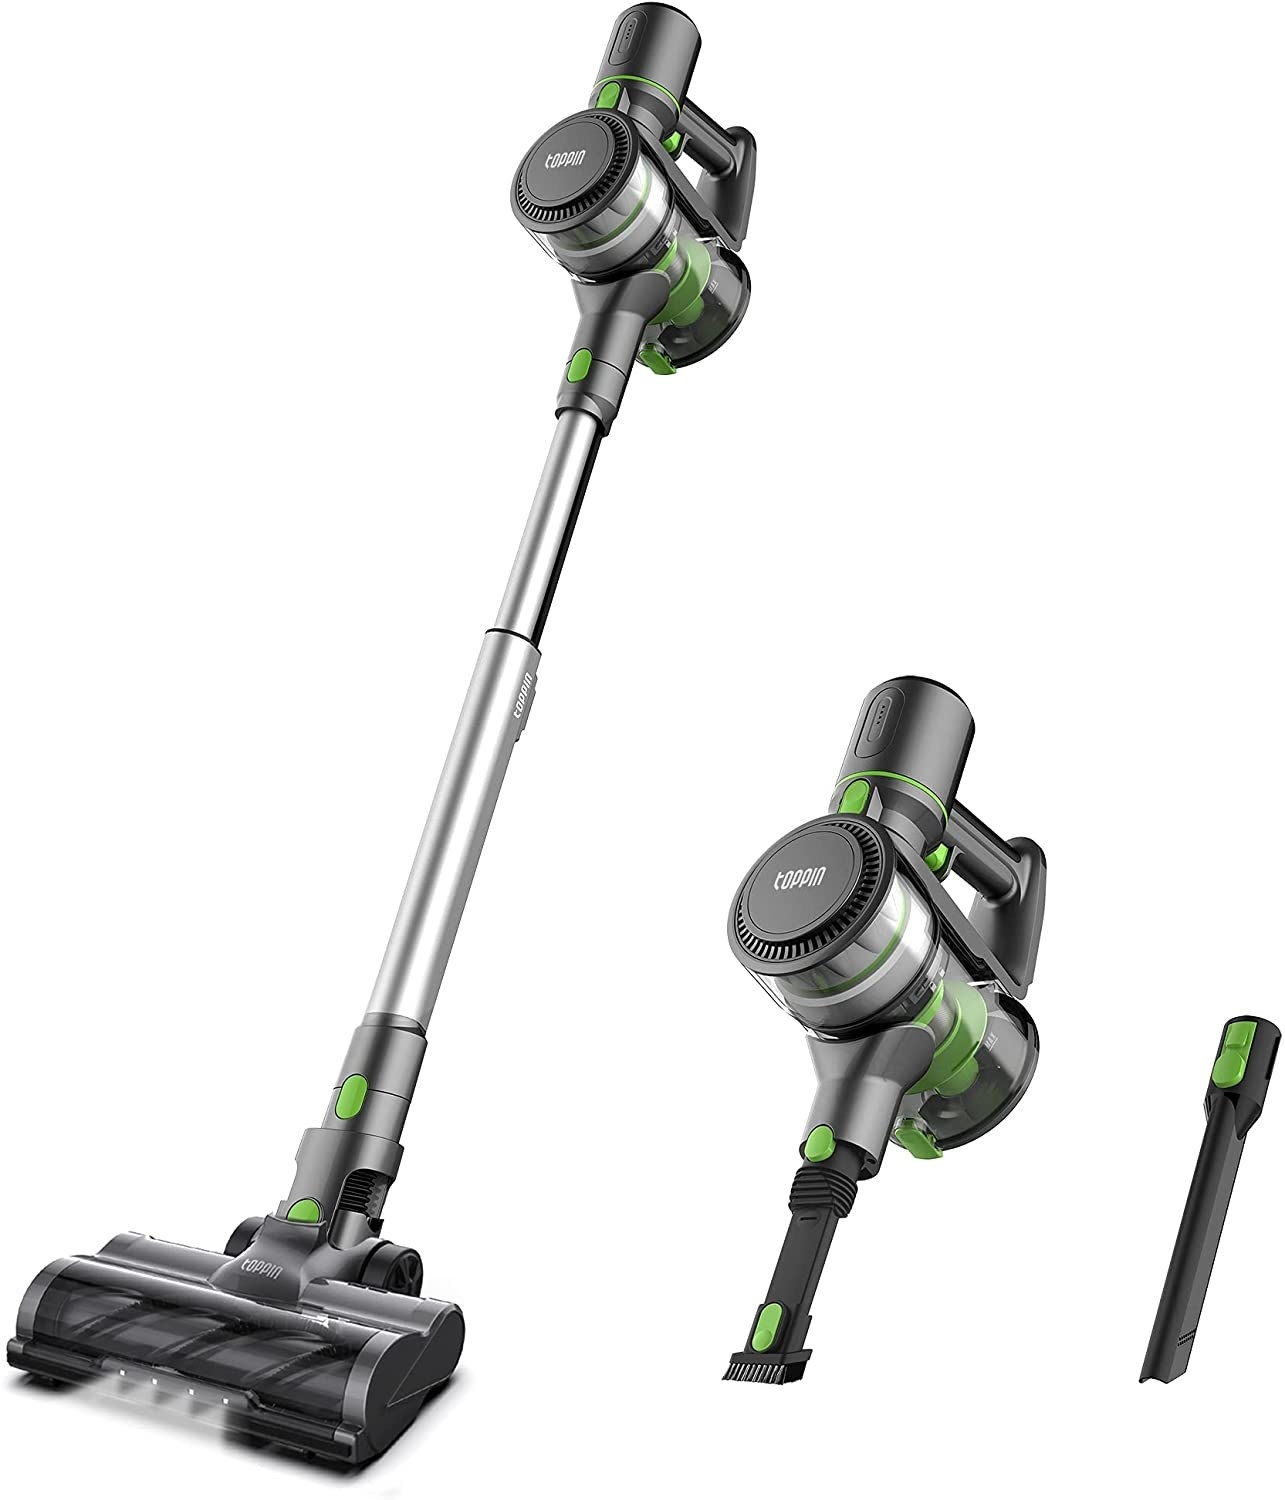 the black and green cordless vacuum